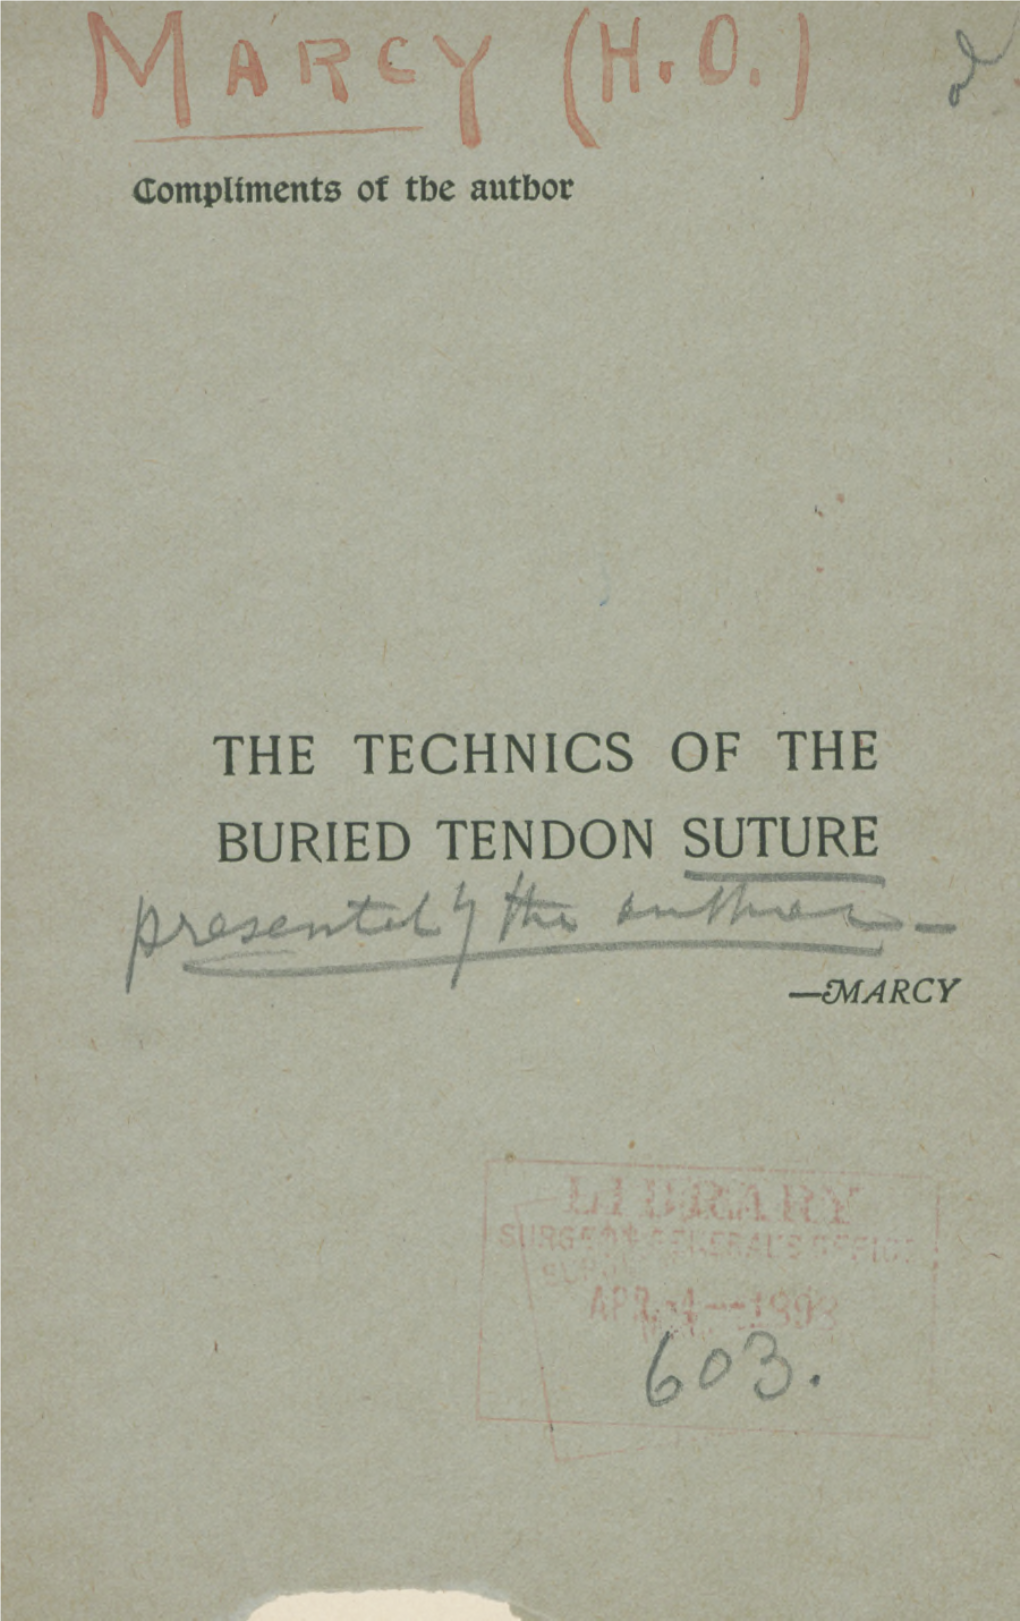 The Technics of the Buried Tendon Suture